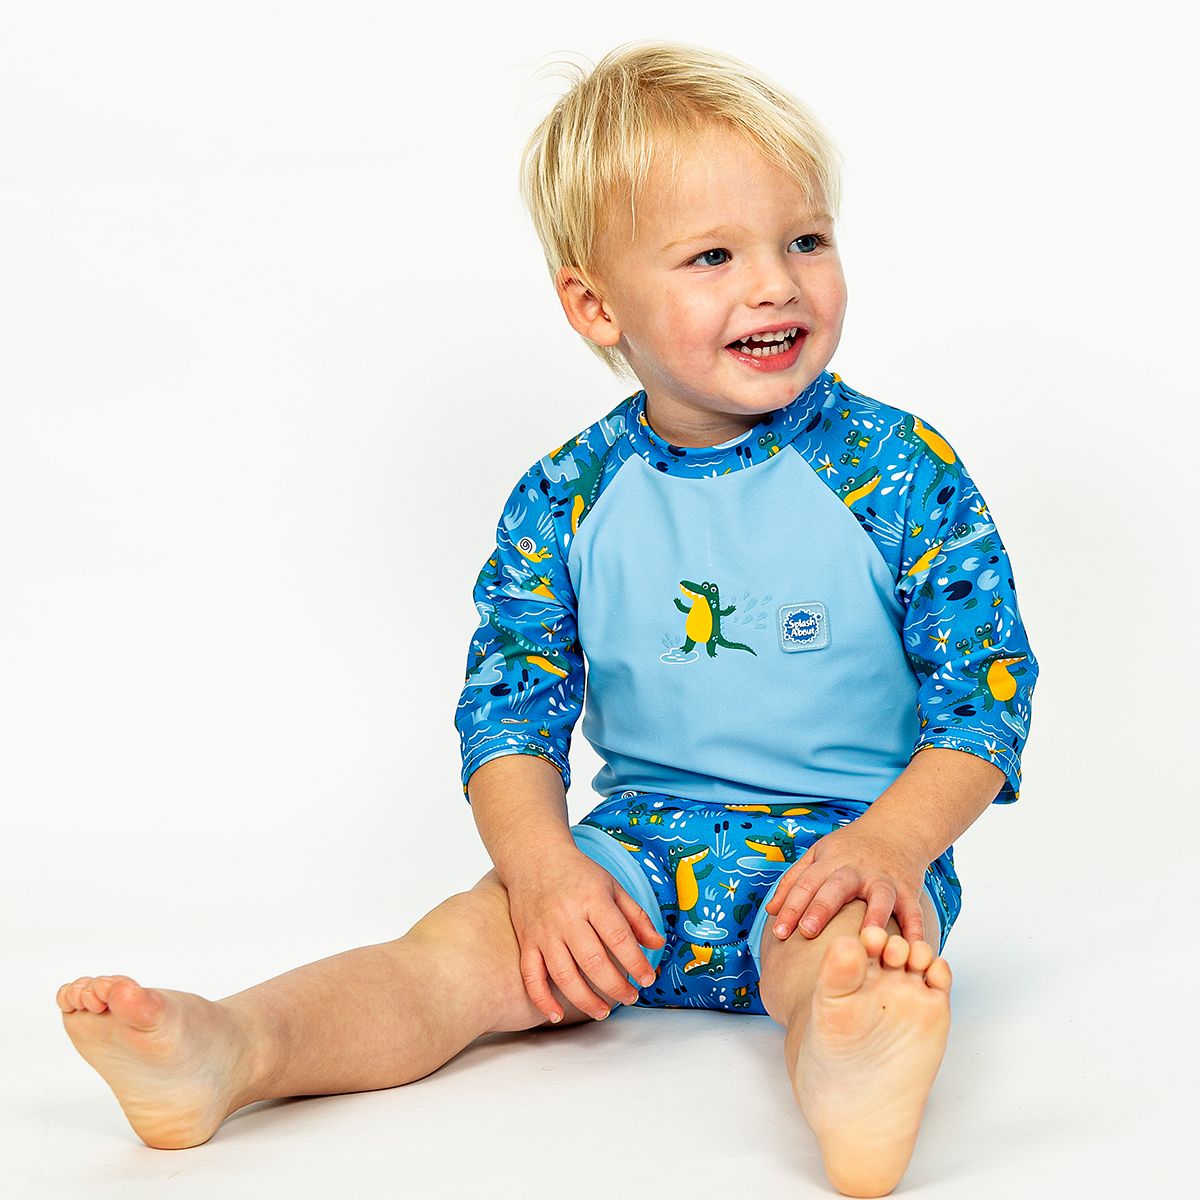 Lifestyle image of toddler wearing a Happy Nappy Sunsuit in blue and swamp themed print, including crocodiles, snails, fireflies, frogs and more. Front.